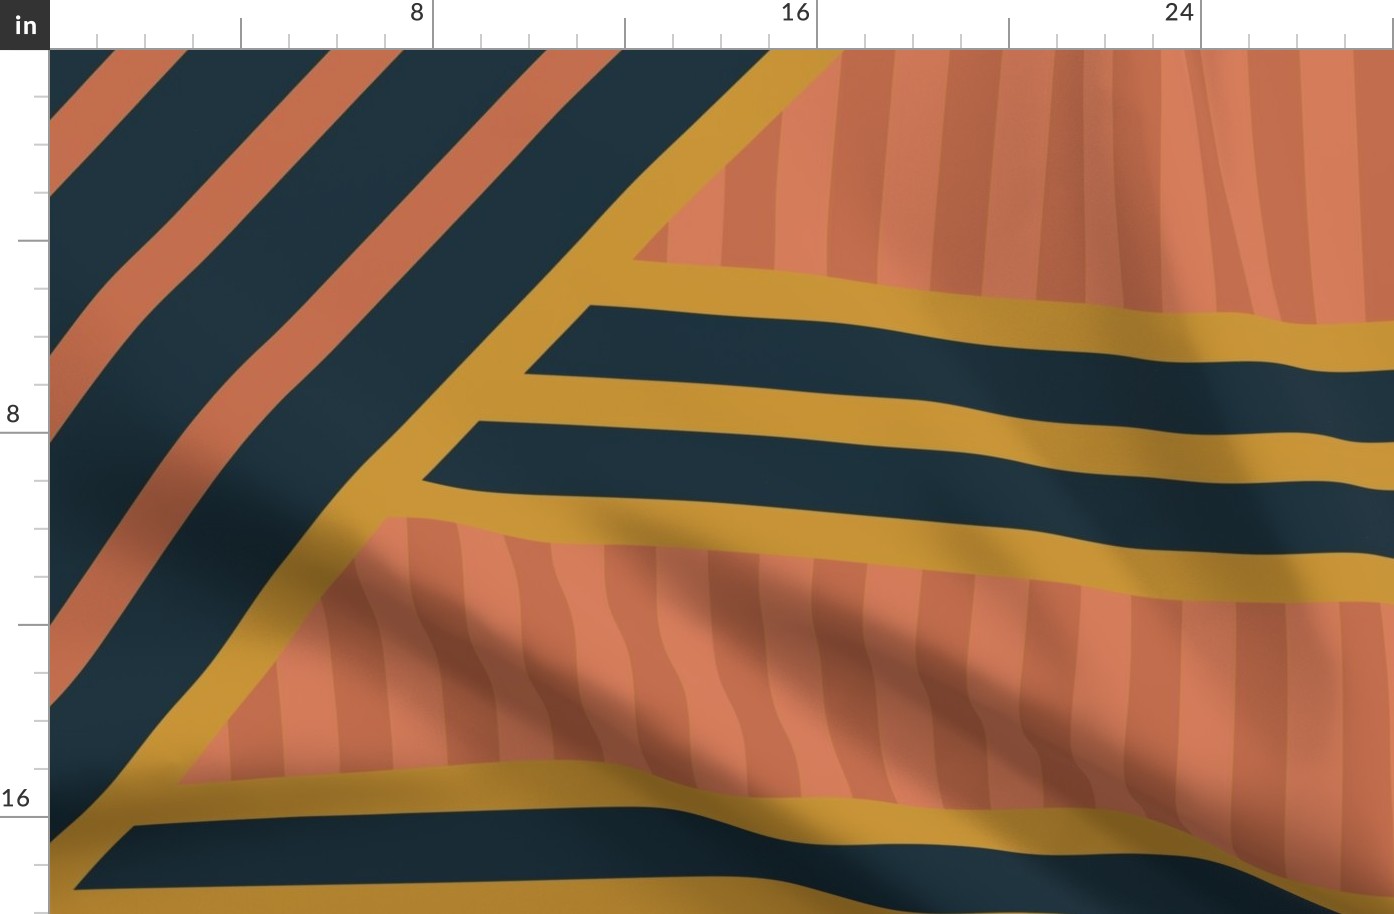 Art Deco Stripes & Curves Whole Cloth Quilt Top - Bold Geometric Cheater Quilt Top Throw Blanket in Navy Blue and Peach